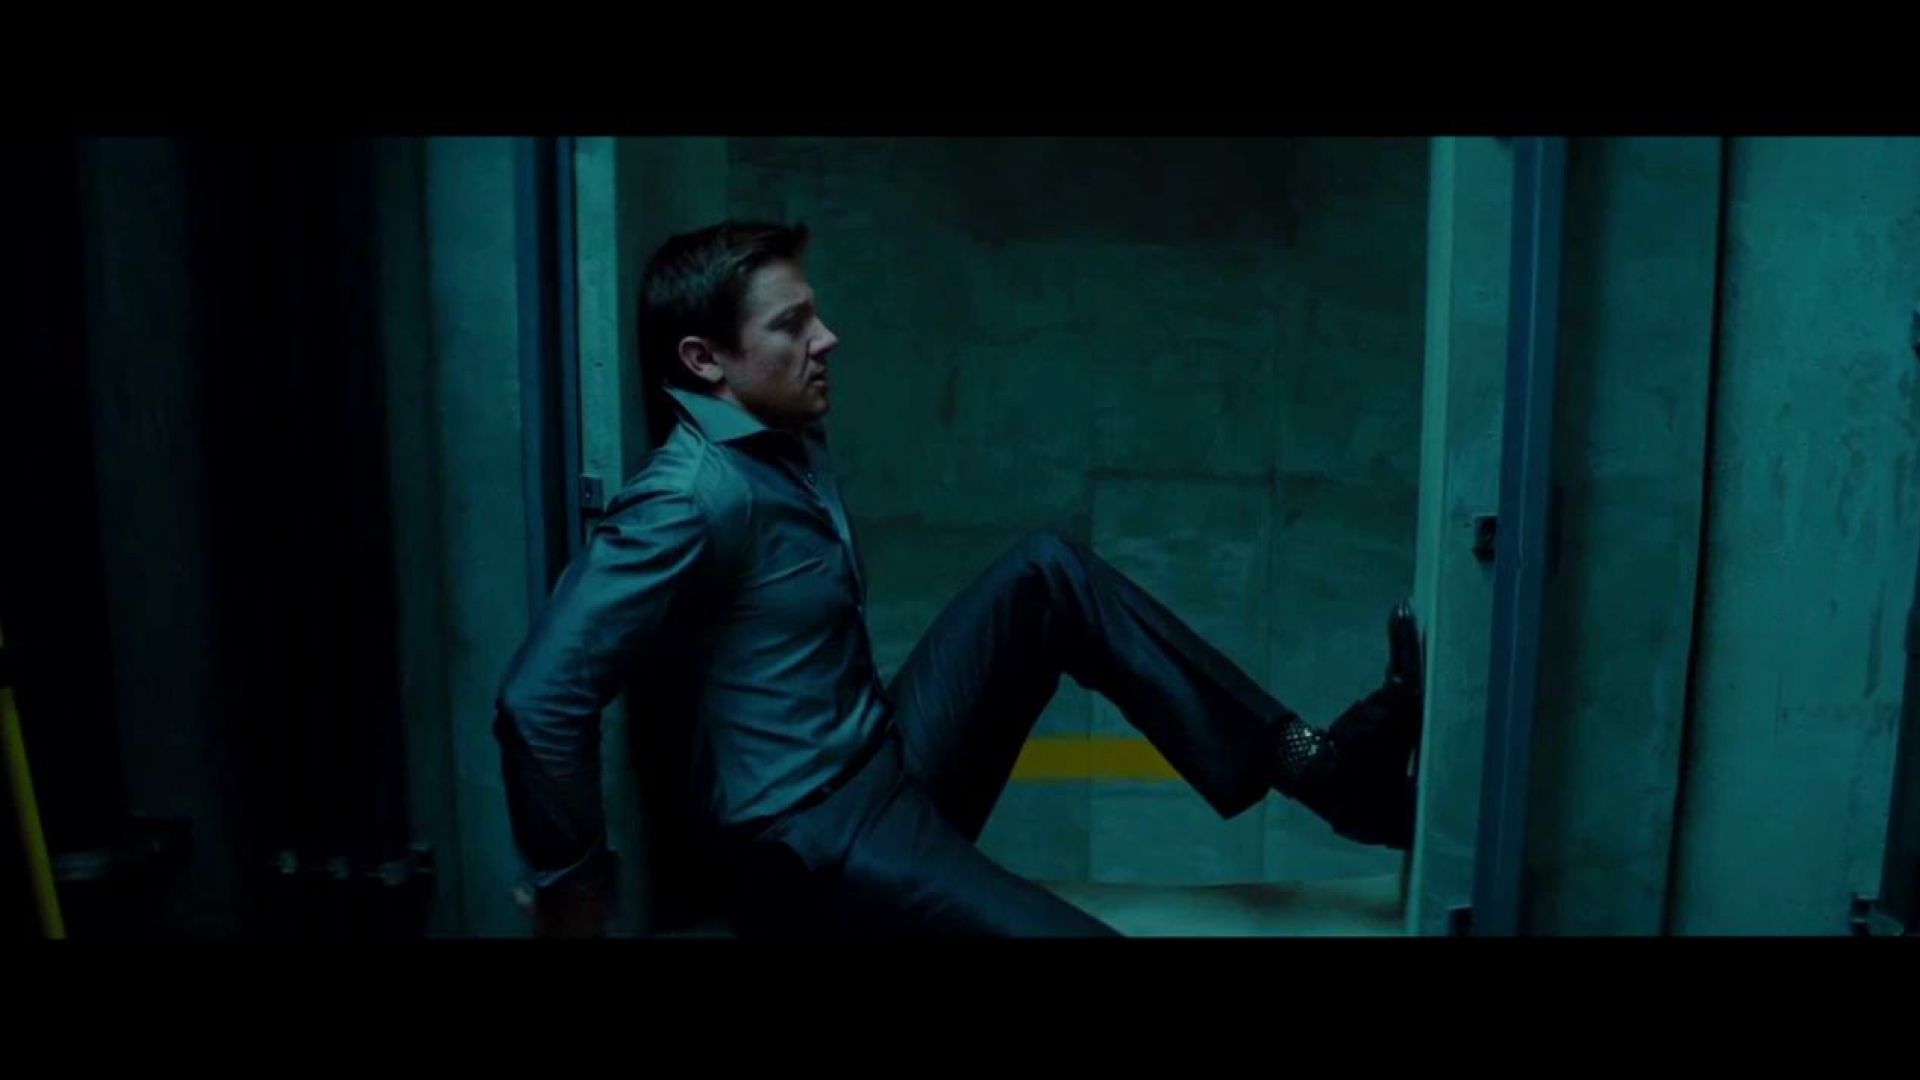 Brandt jumps onto the computer fan in Mission Impossible 4